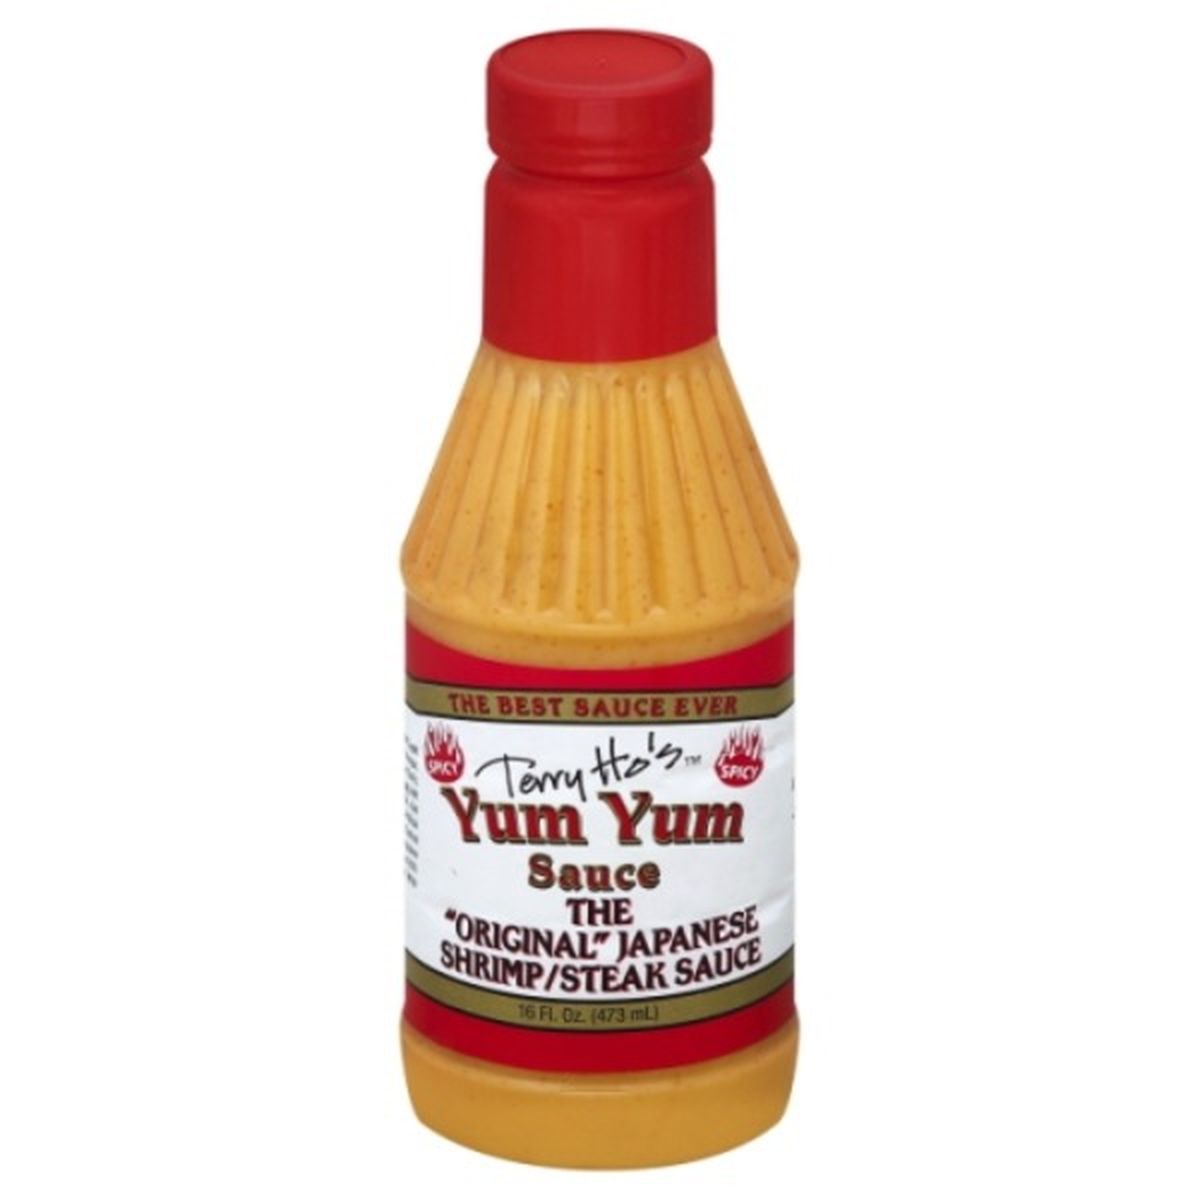 Calories in Terry Ho's Yum Yum Sauce, Spicy